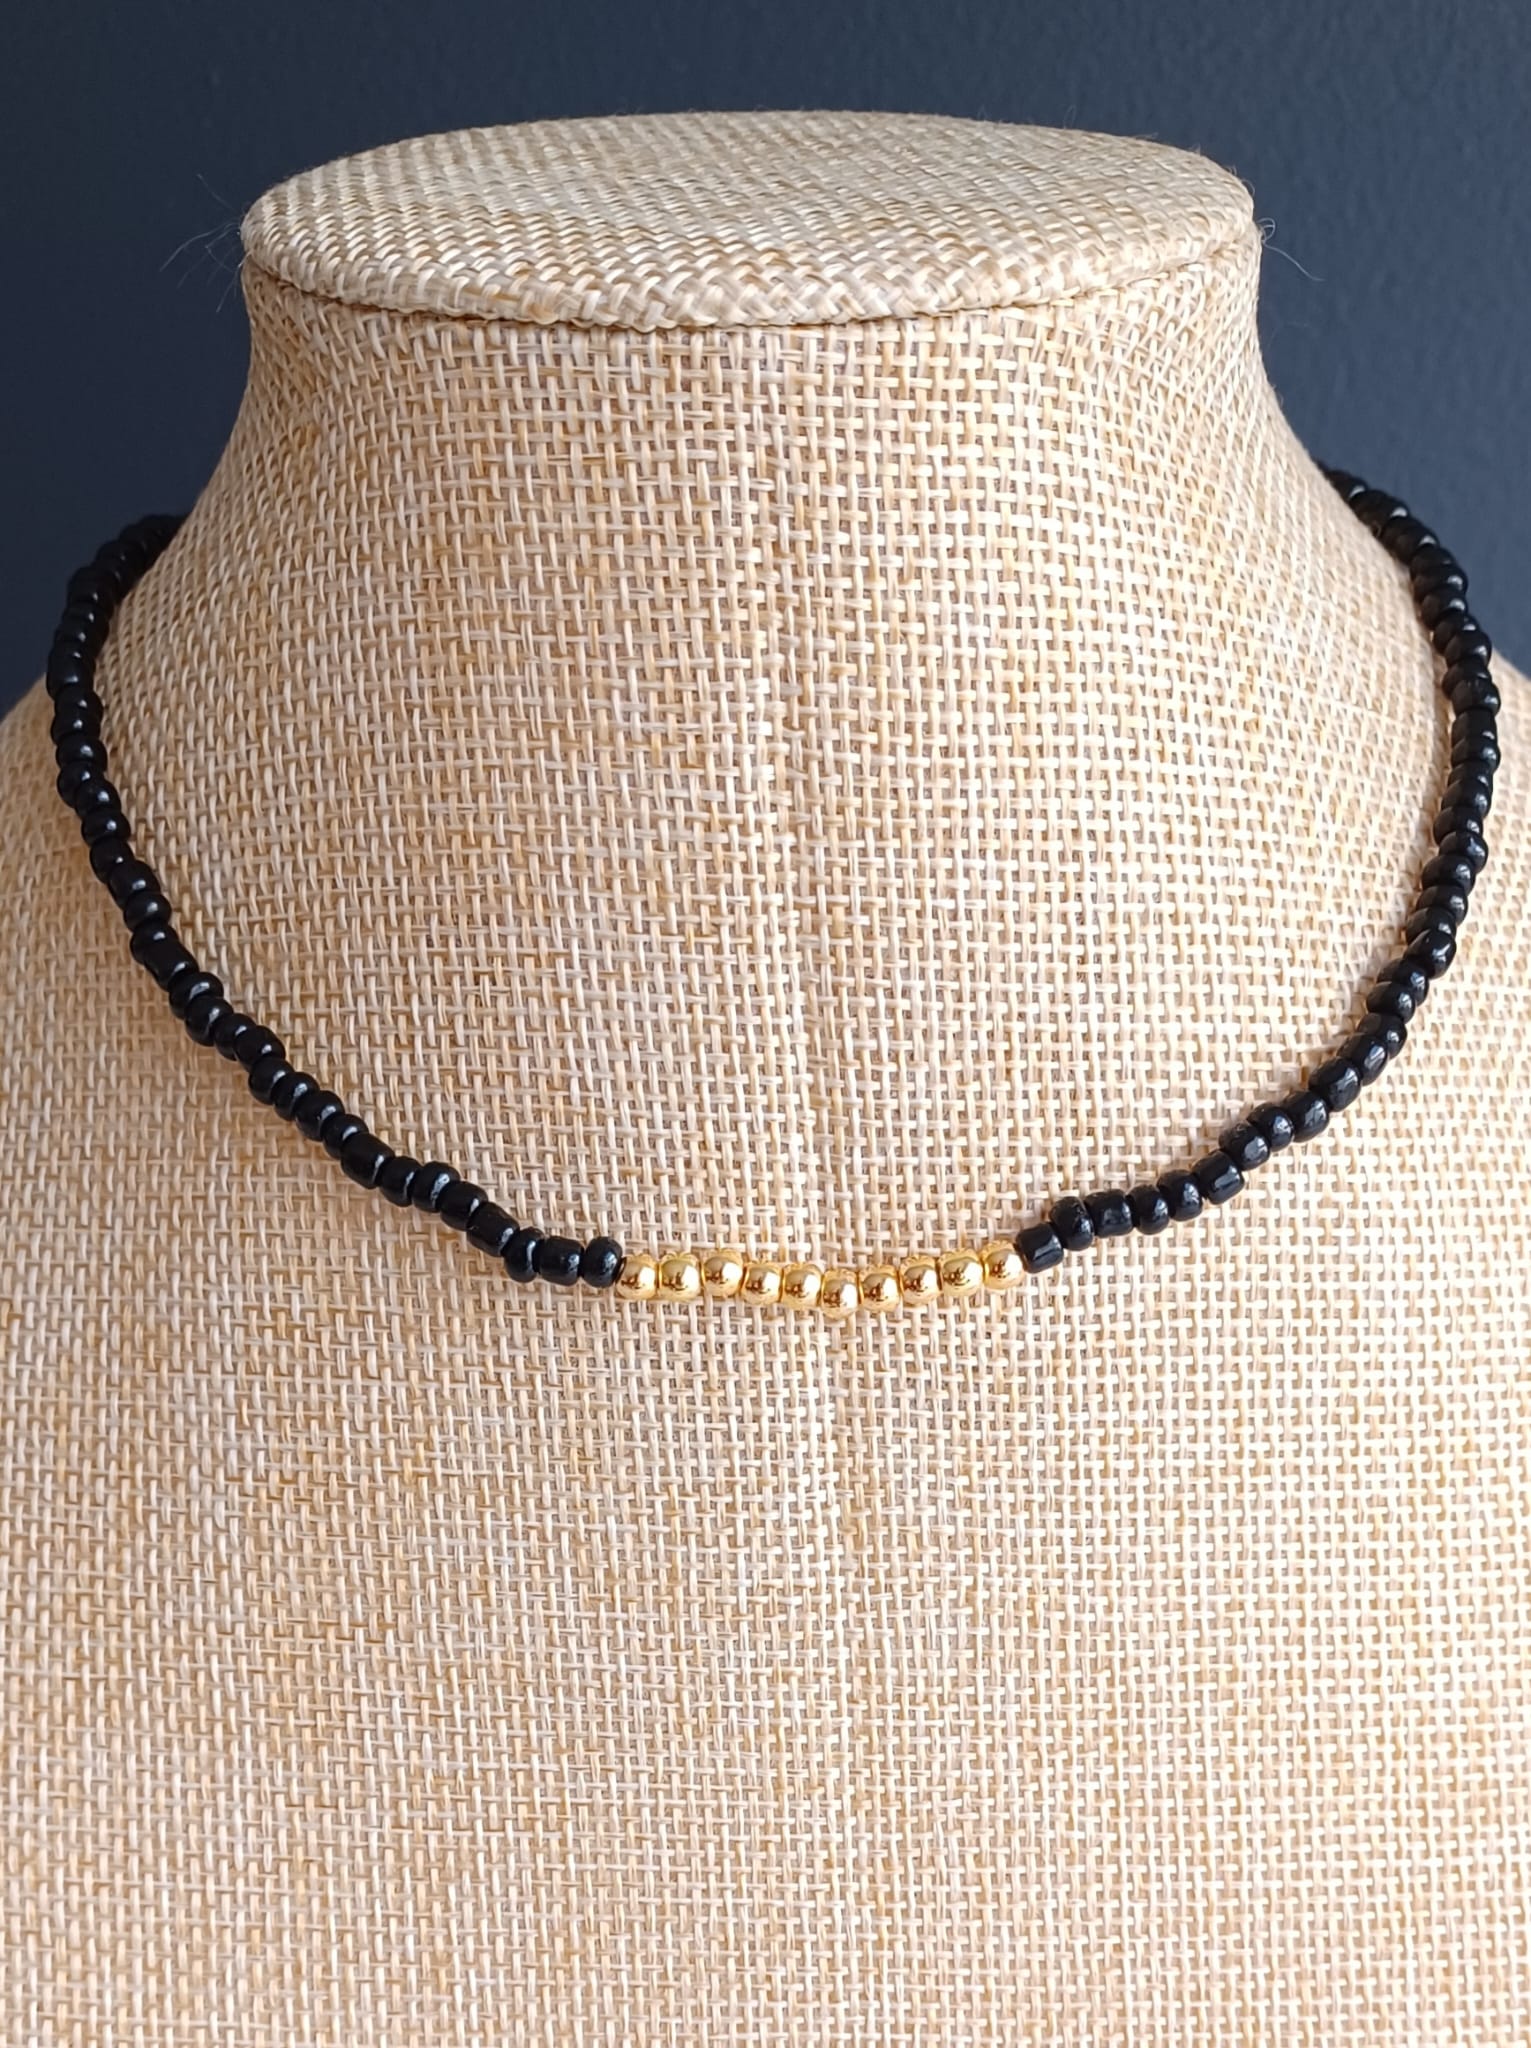 Black beads necklace and goldfilled beads